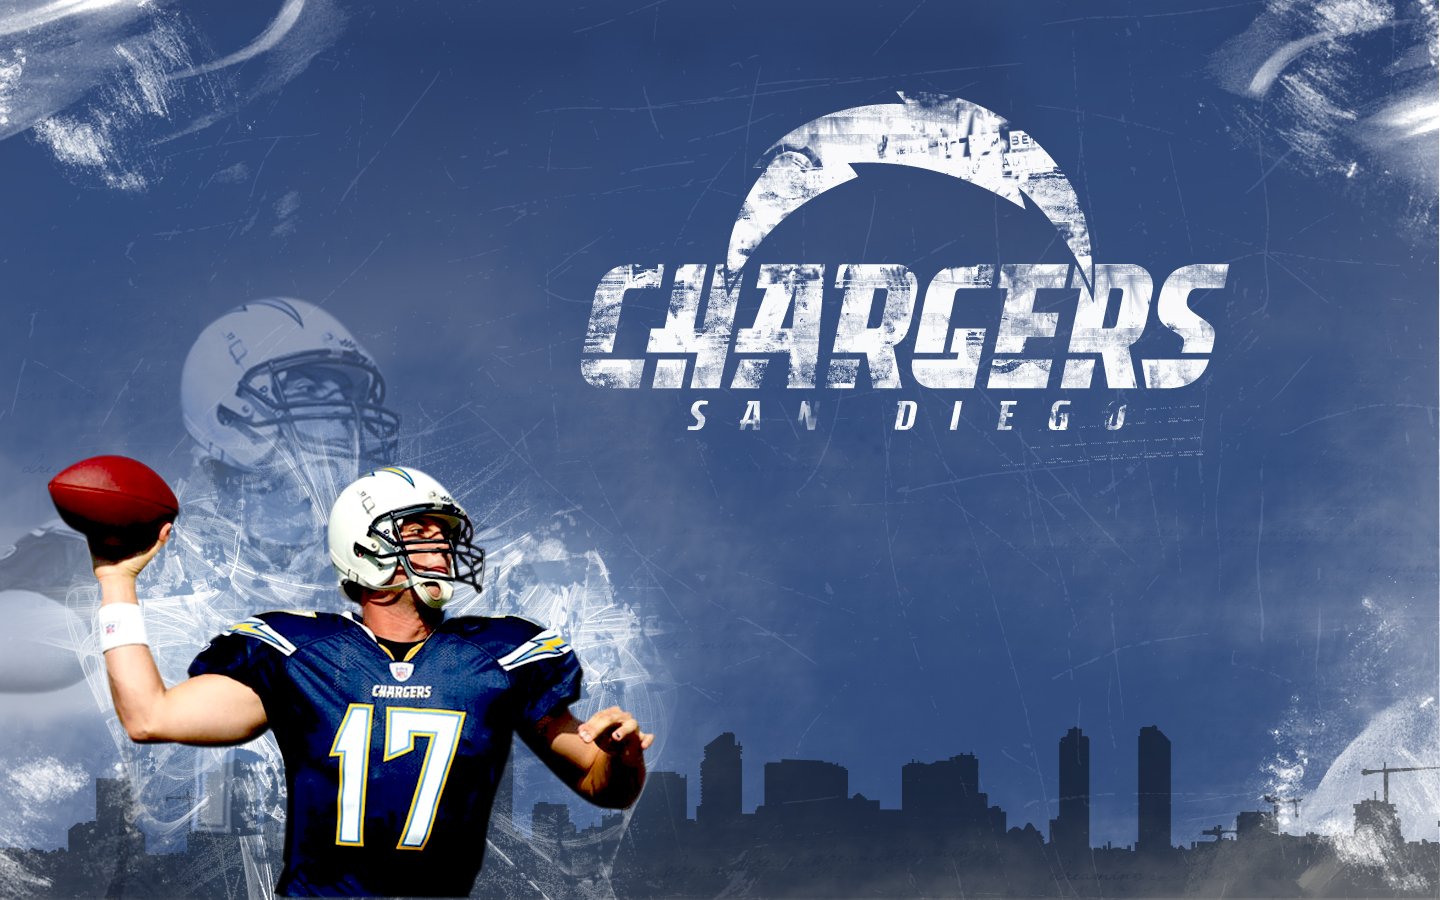  san diego chargers wallpaper oesn1 07 17 2011 san diego chargers 1440x900